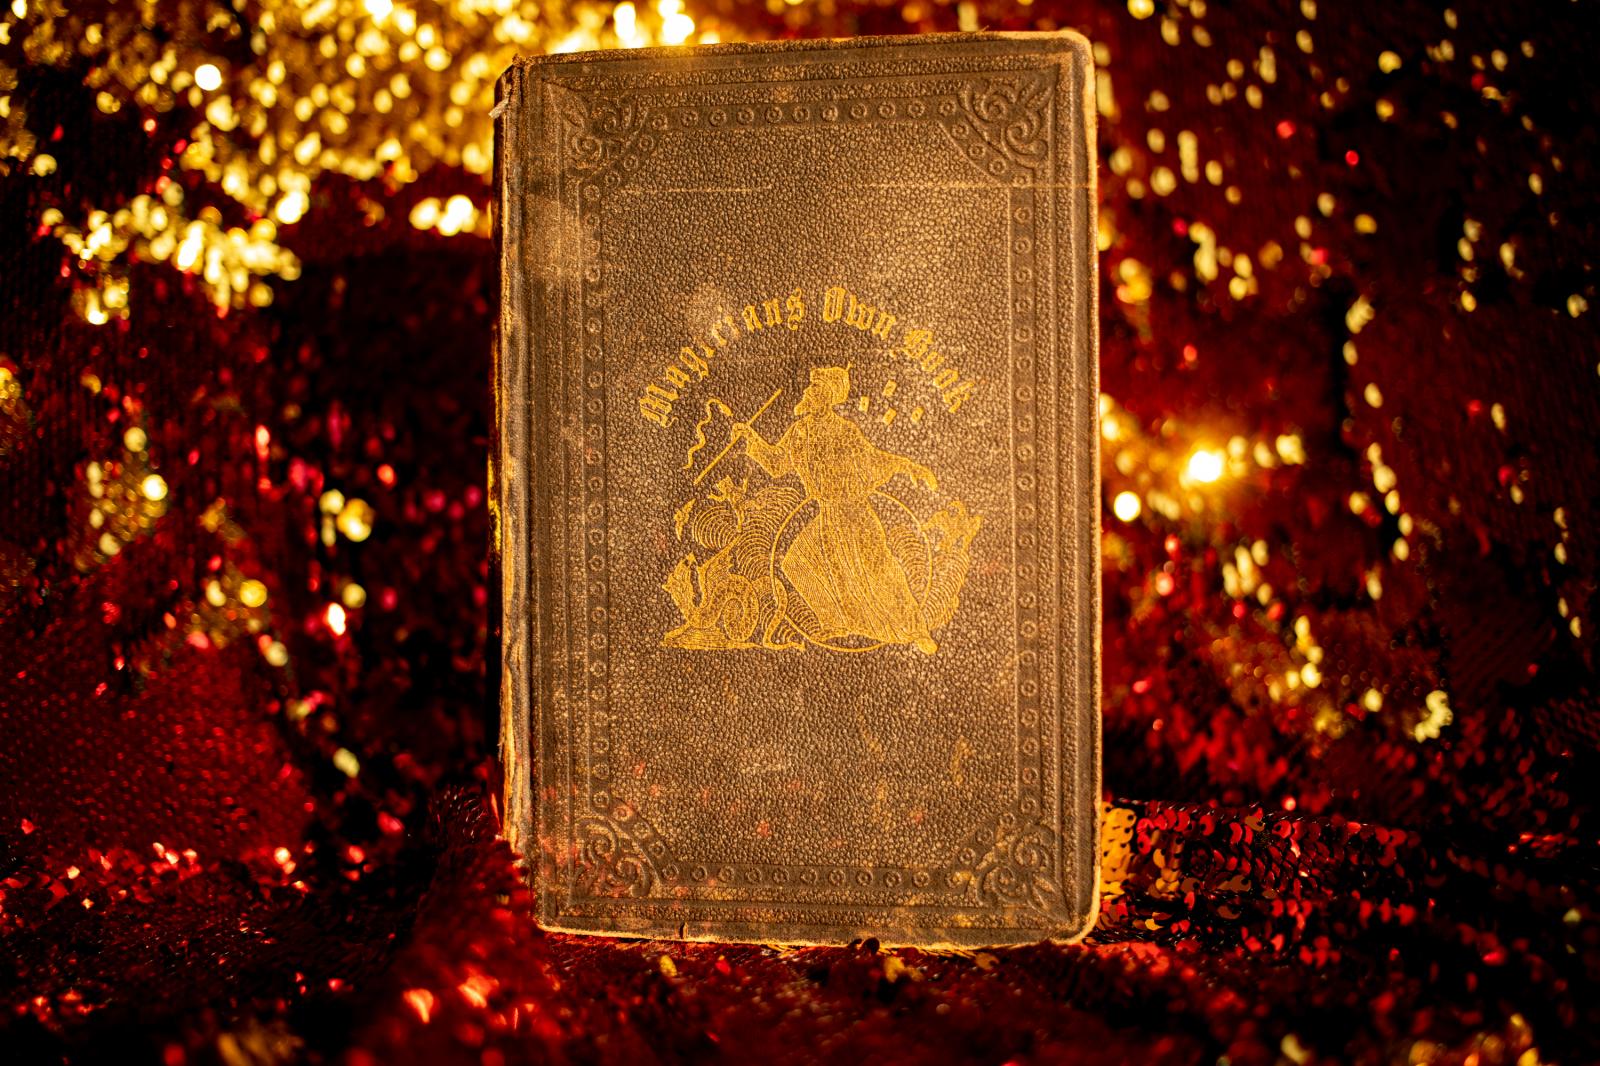  An old magic book that belongs...d gave it to her as a present. 